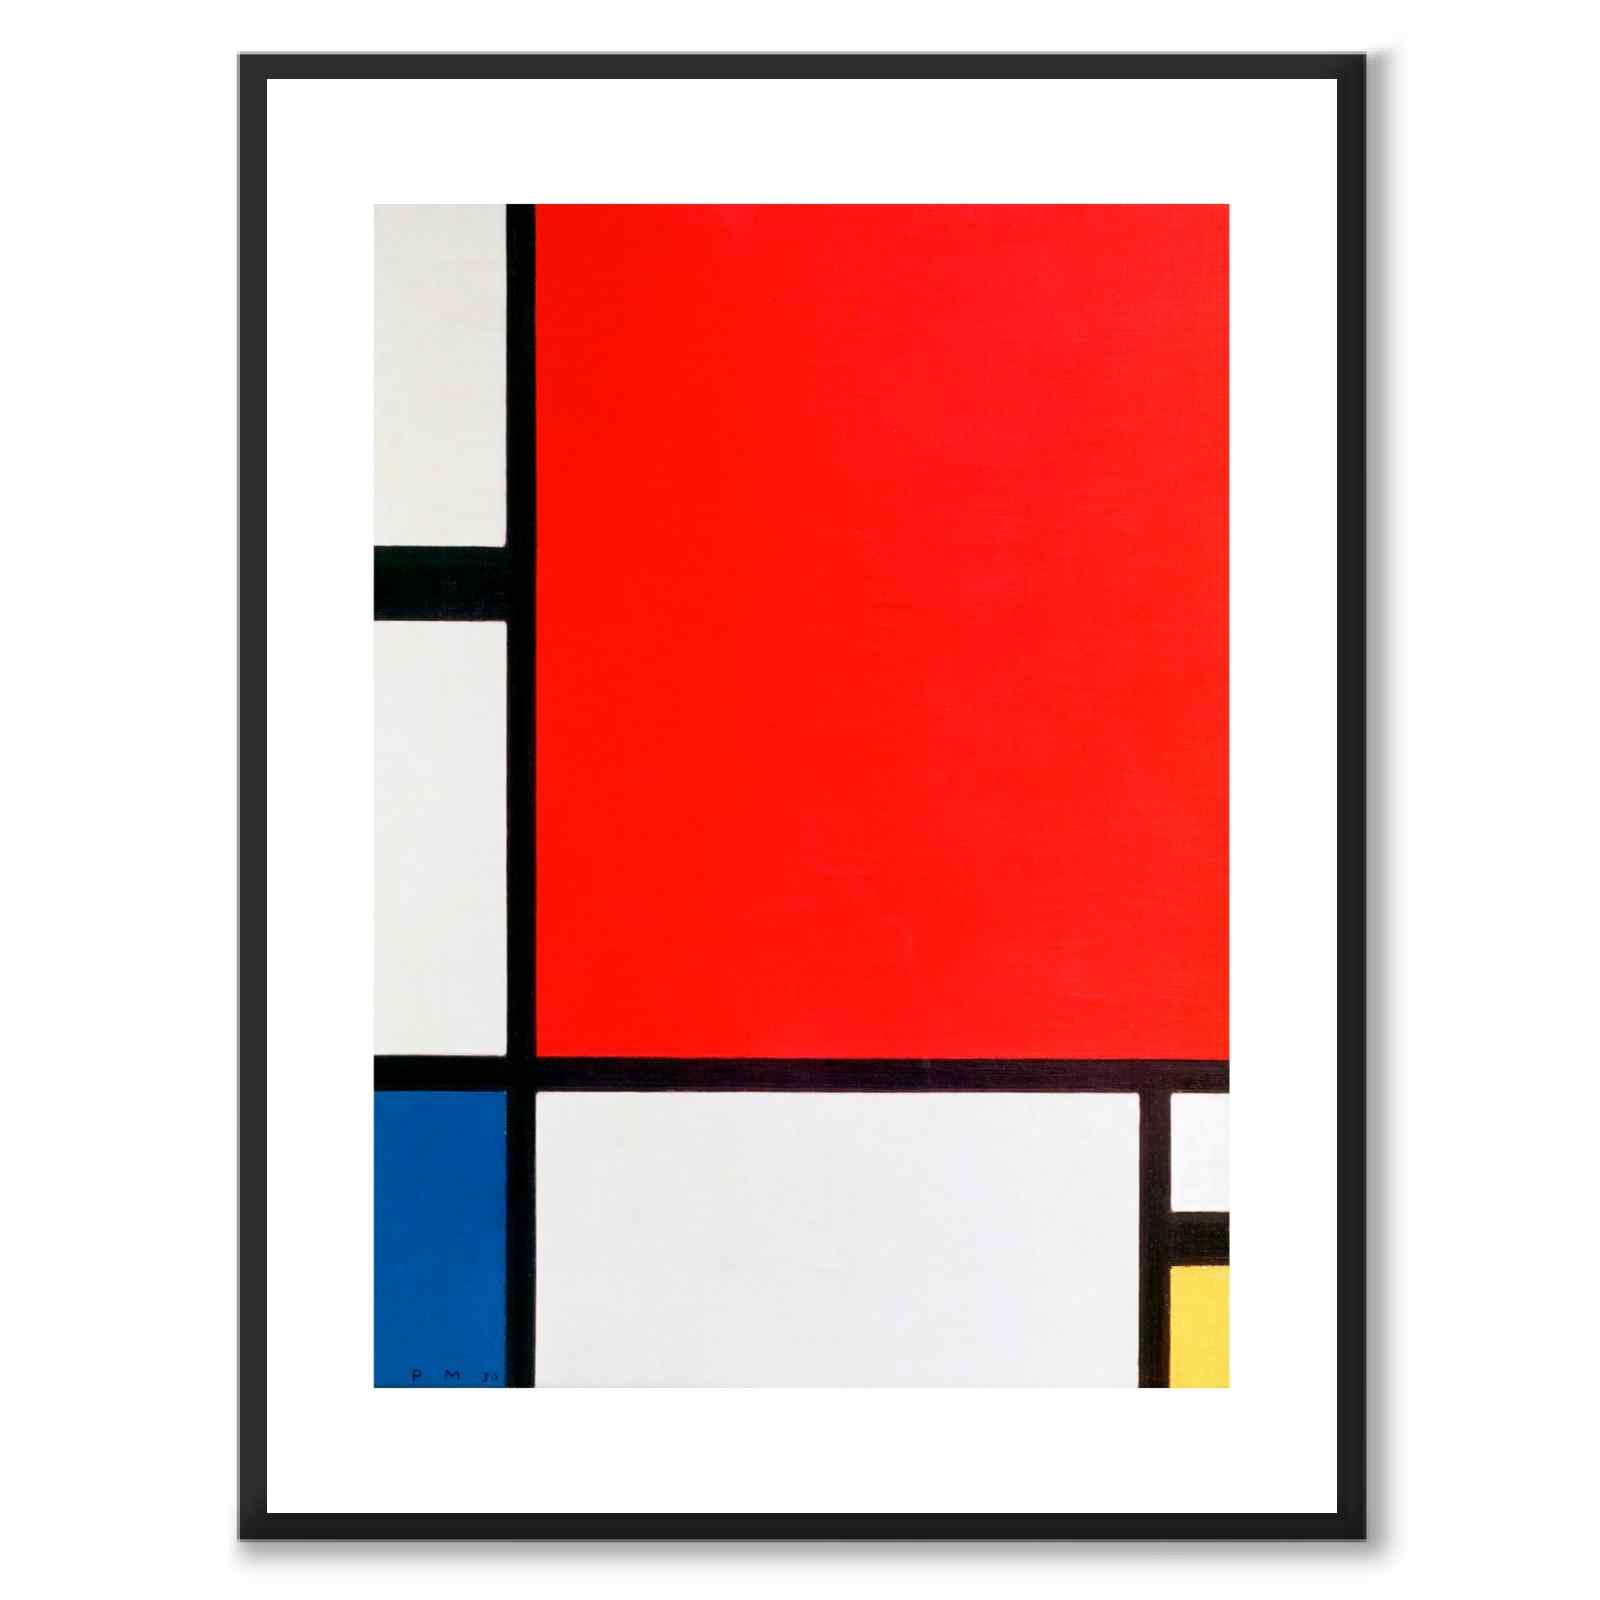 Composition with Red, Blue, and Yellow - Poster